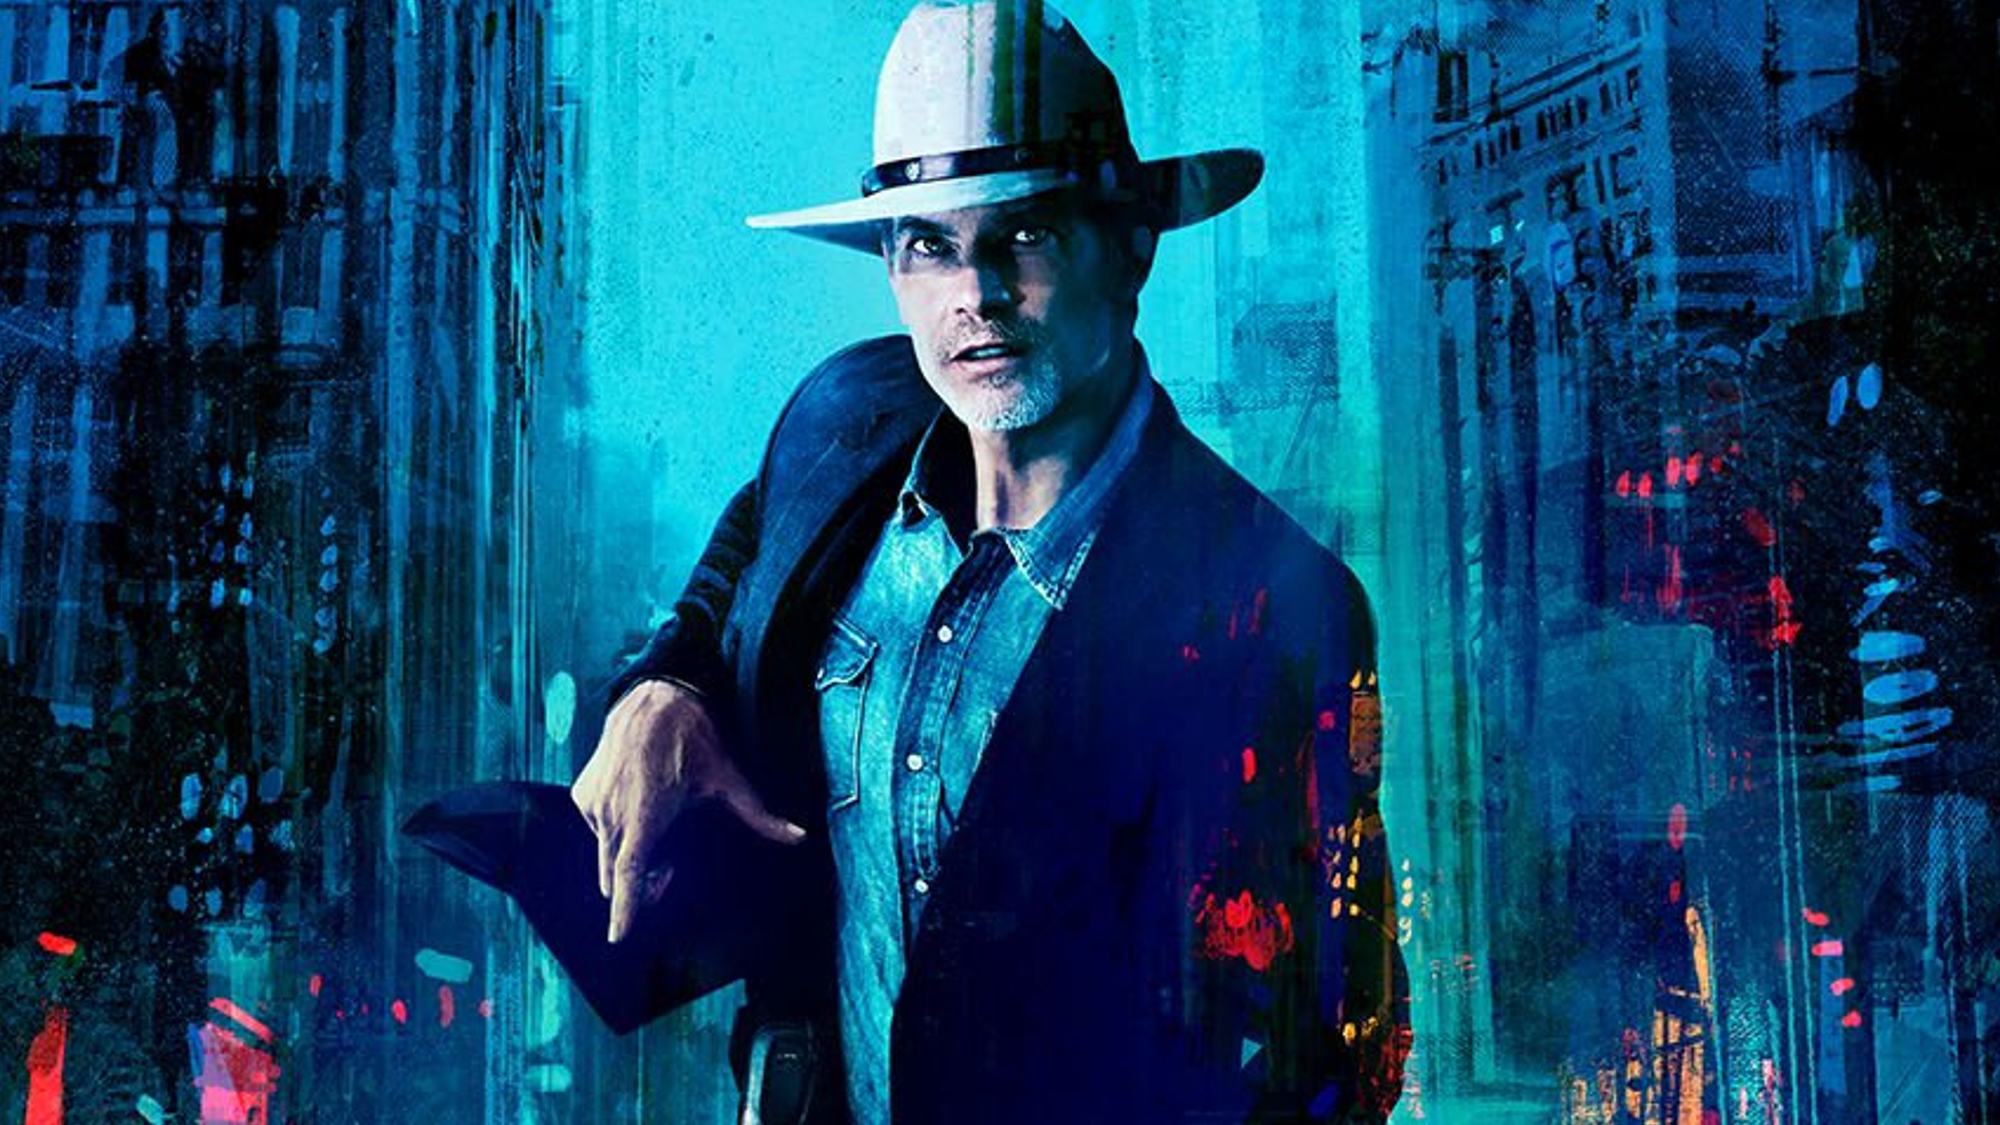 Timothy Olyphant says Raylan Givens is a 'fish out of water' in Justified: City Primeval